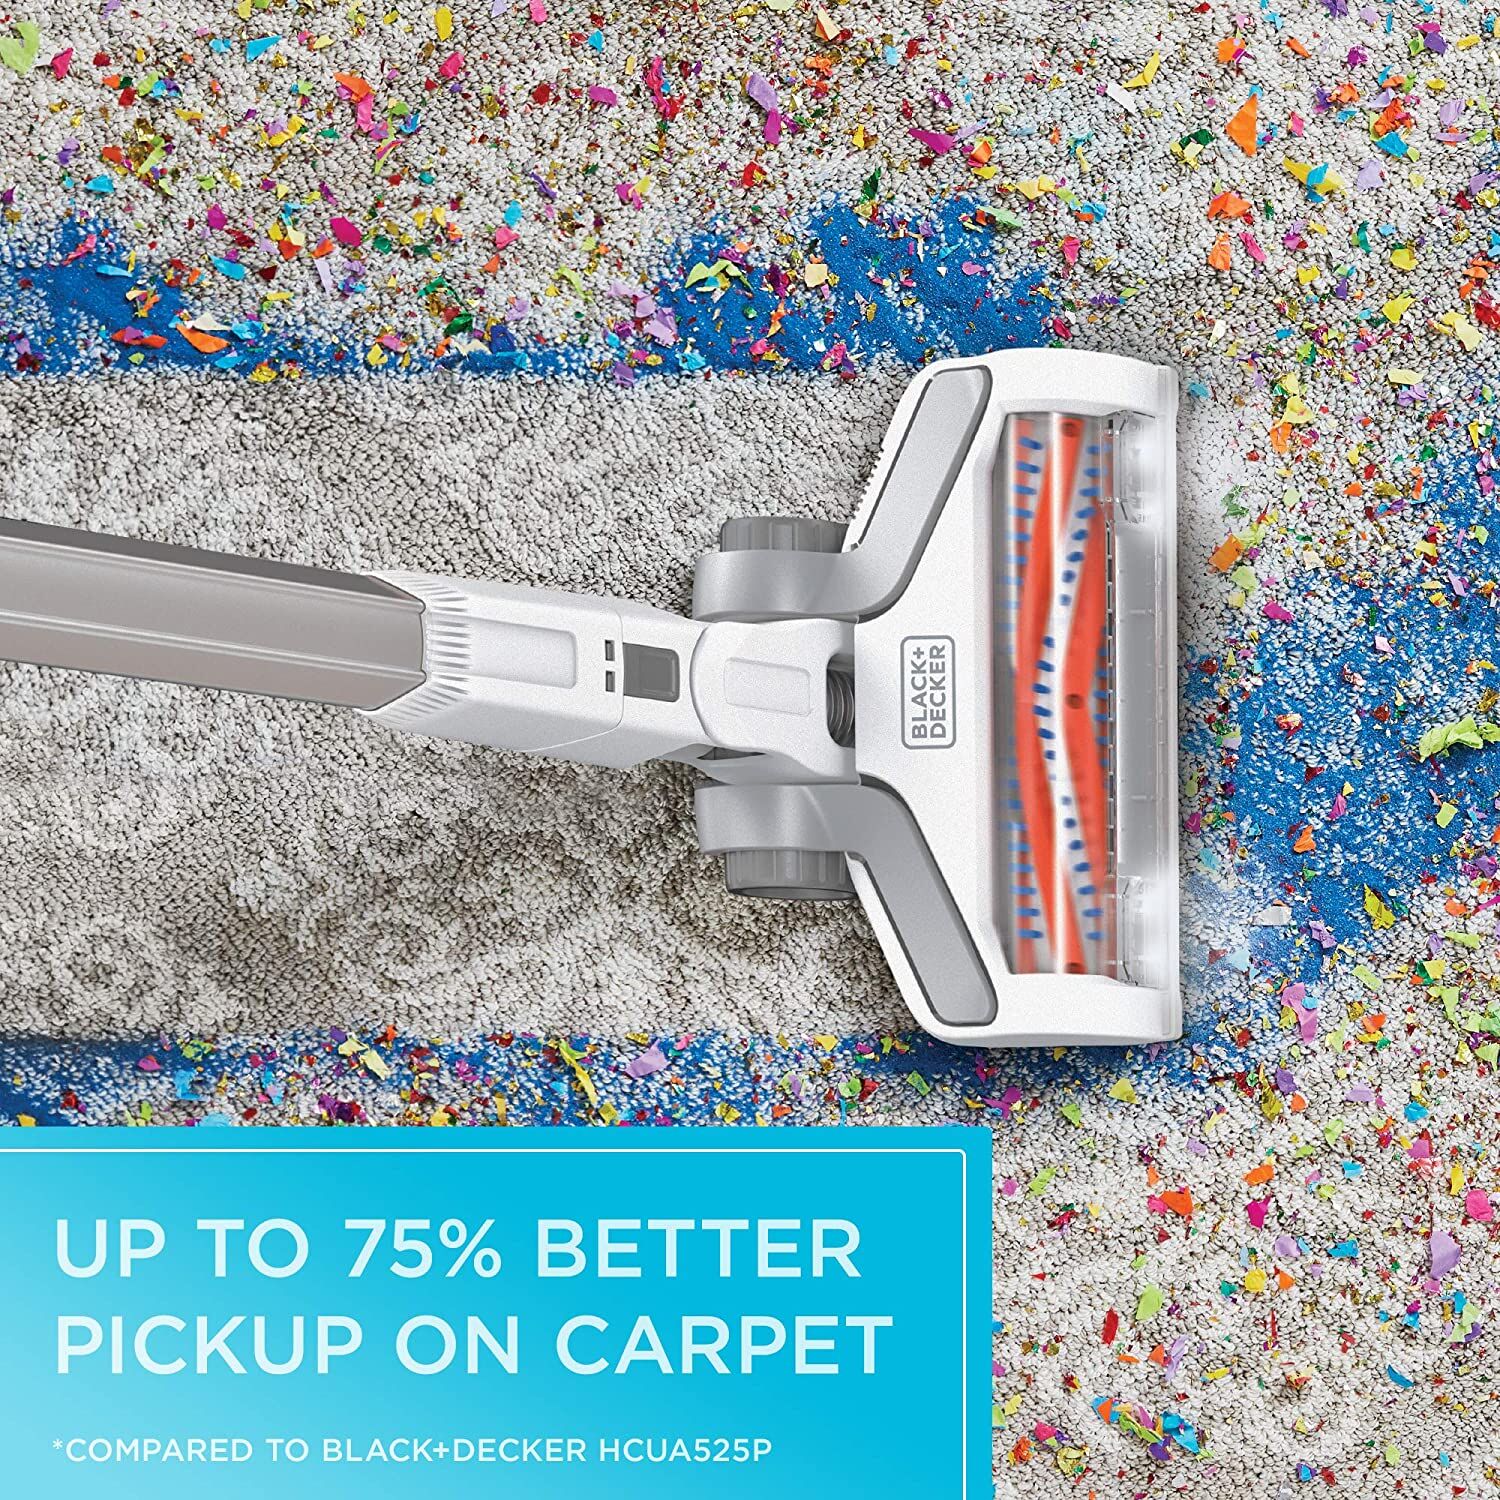 Overhead view of Black and Decker Power series extreme 20 volt max stick vacuum cleaning up colorful debris from a carpet floor